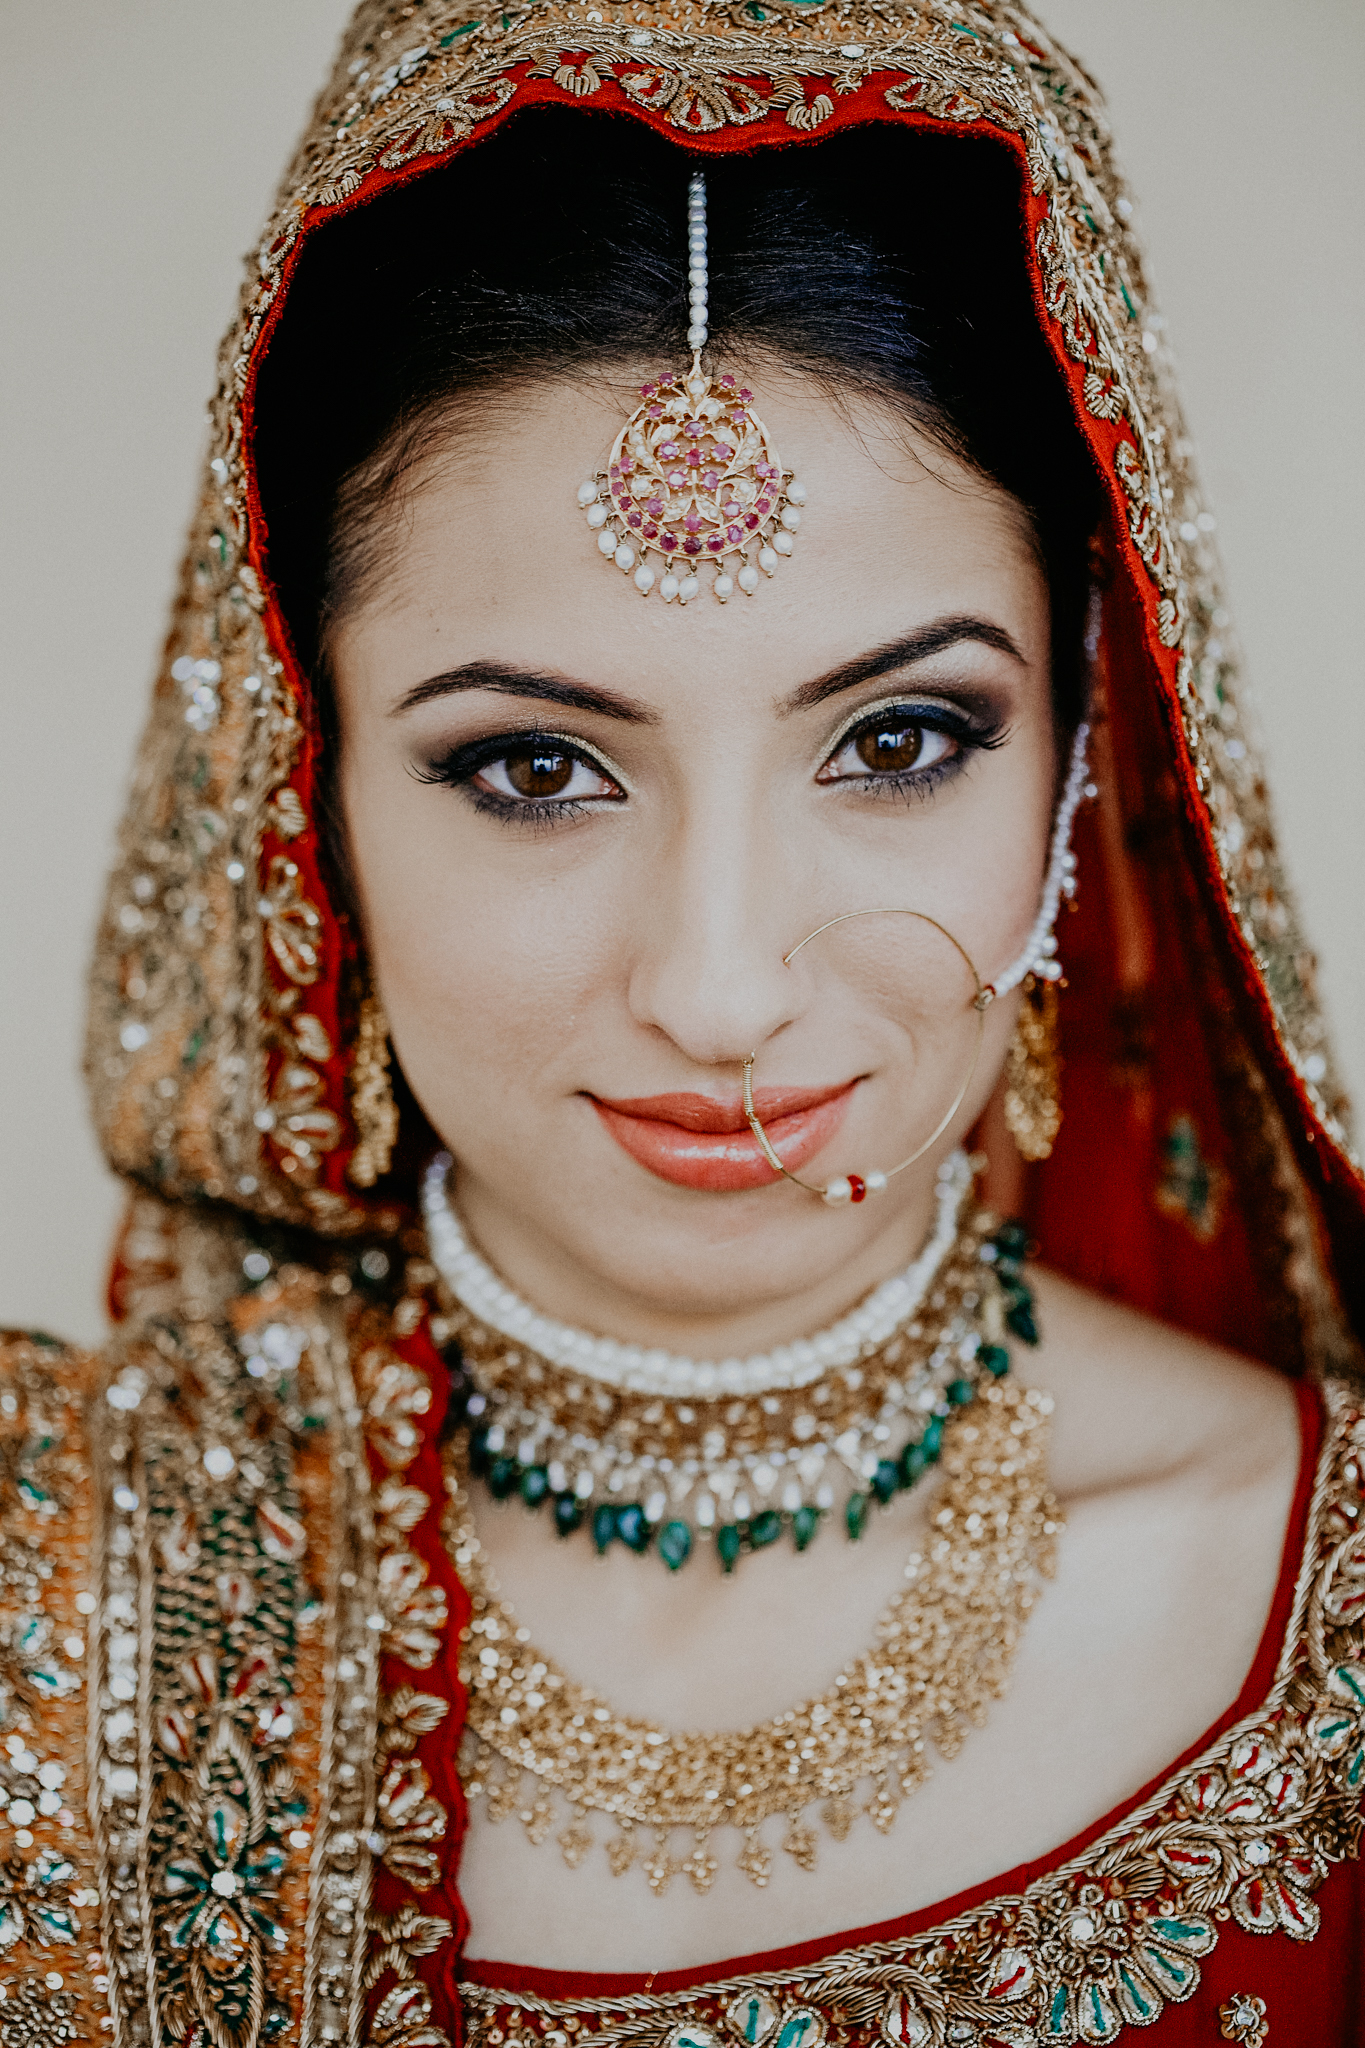 Portrait of Indian bride in red and gold dress